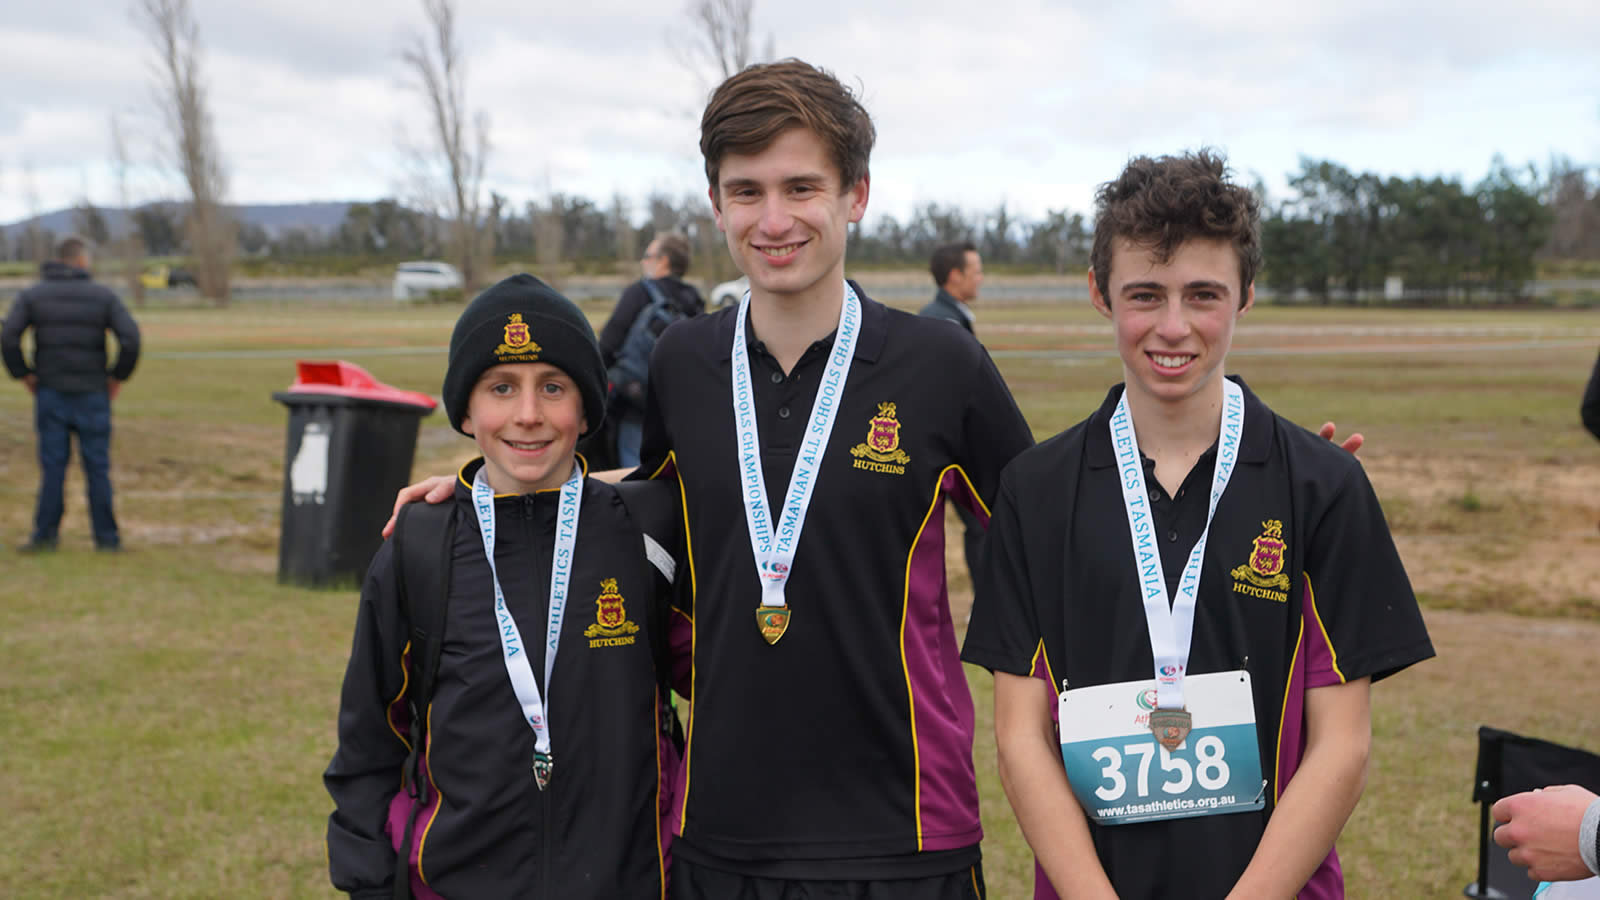 All Schools Cross Country | Latest news | The Hutchins School, Hobart ...